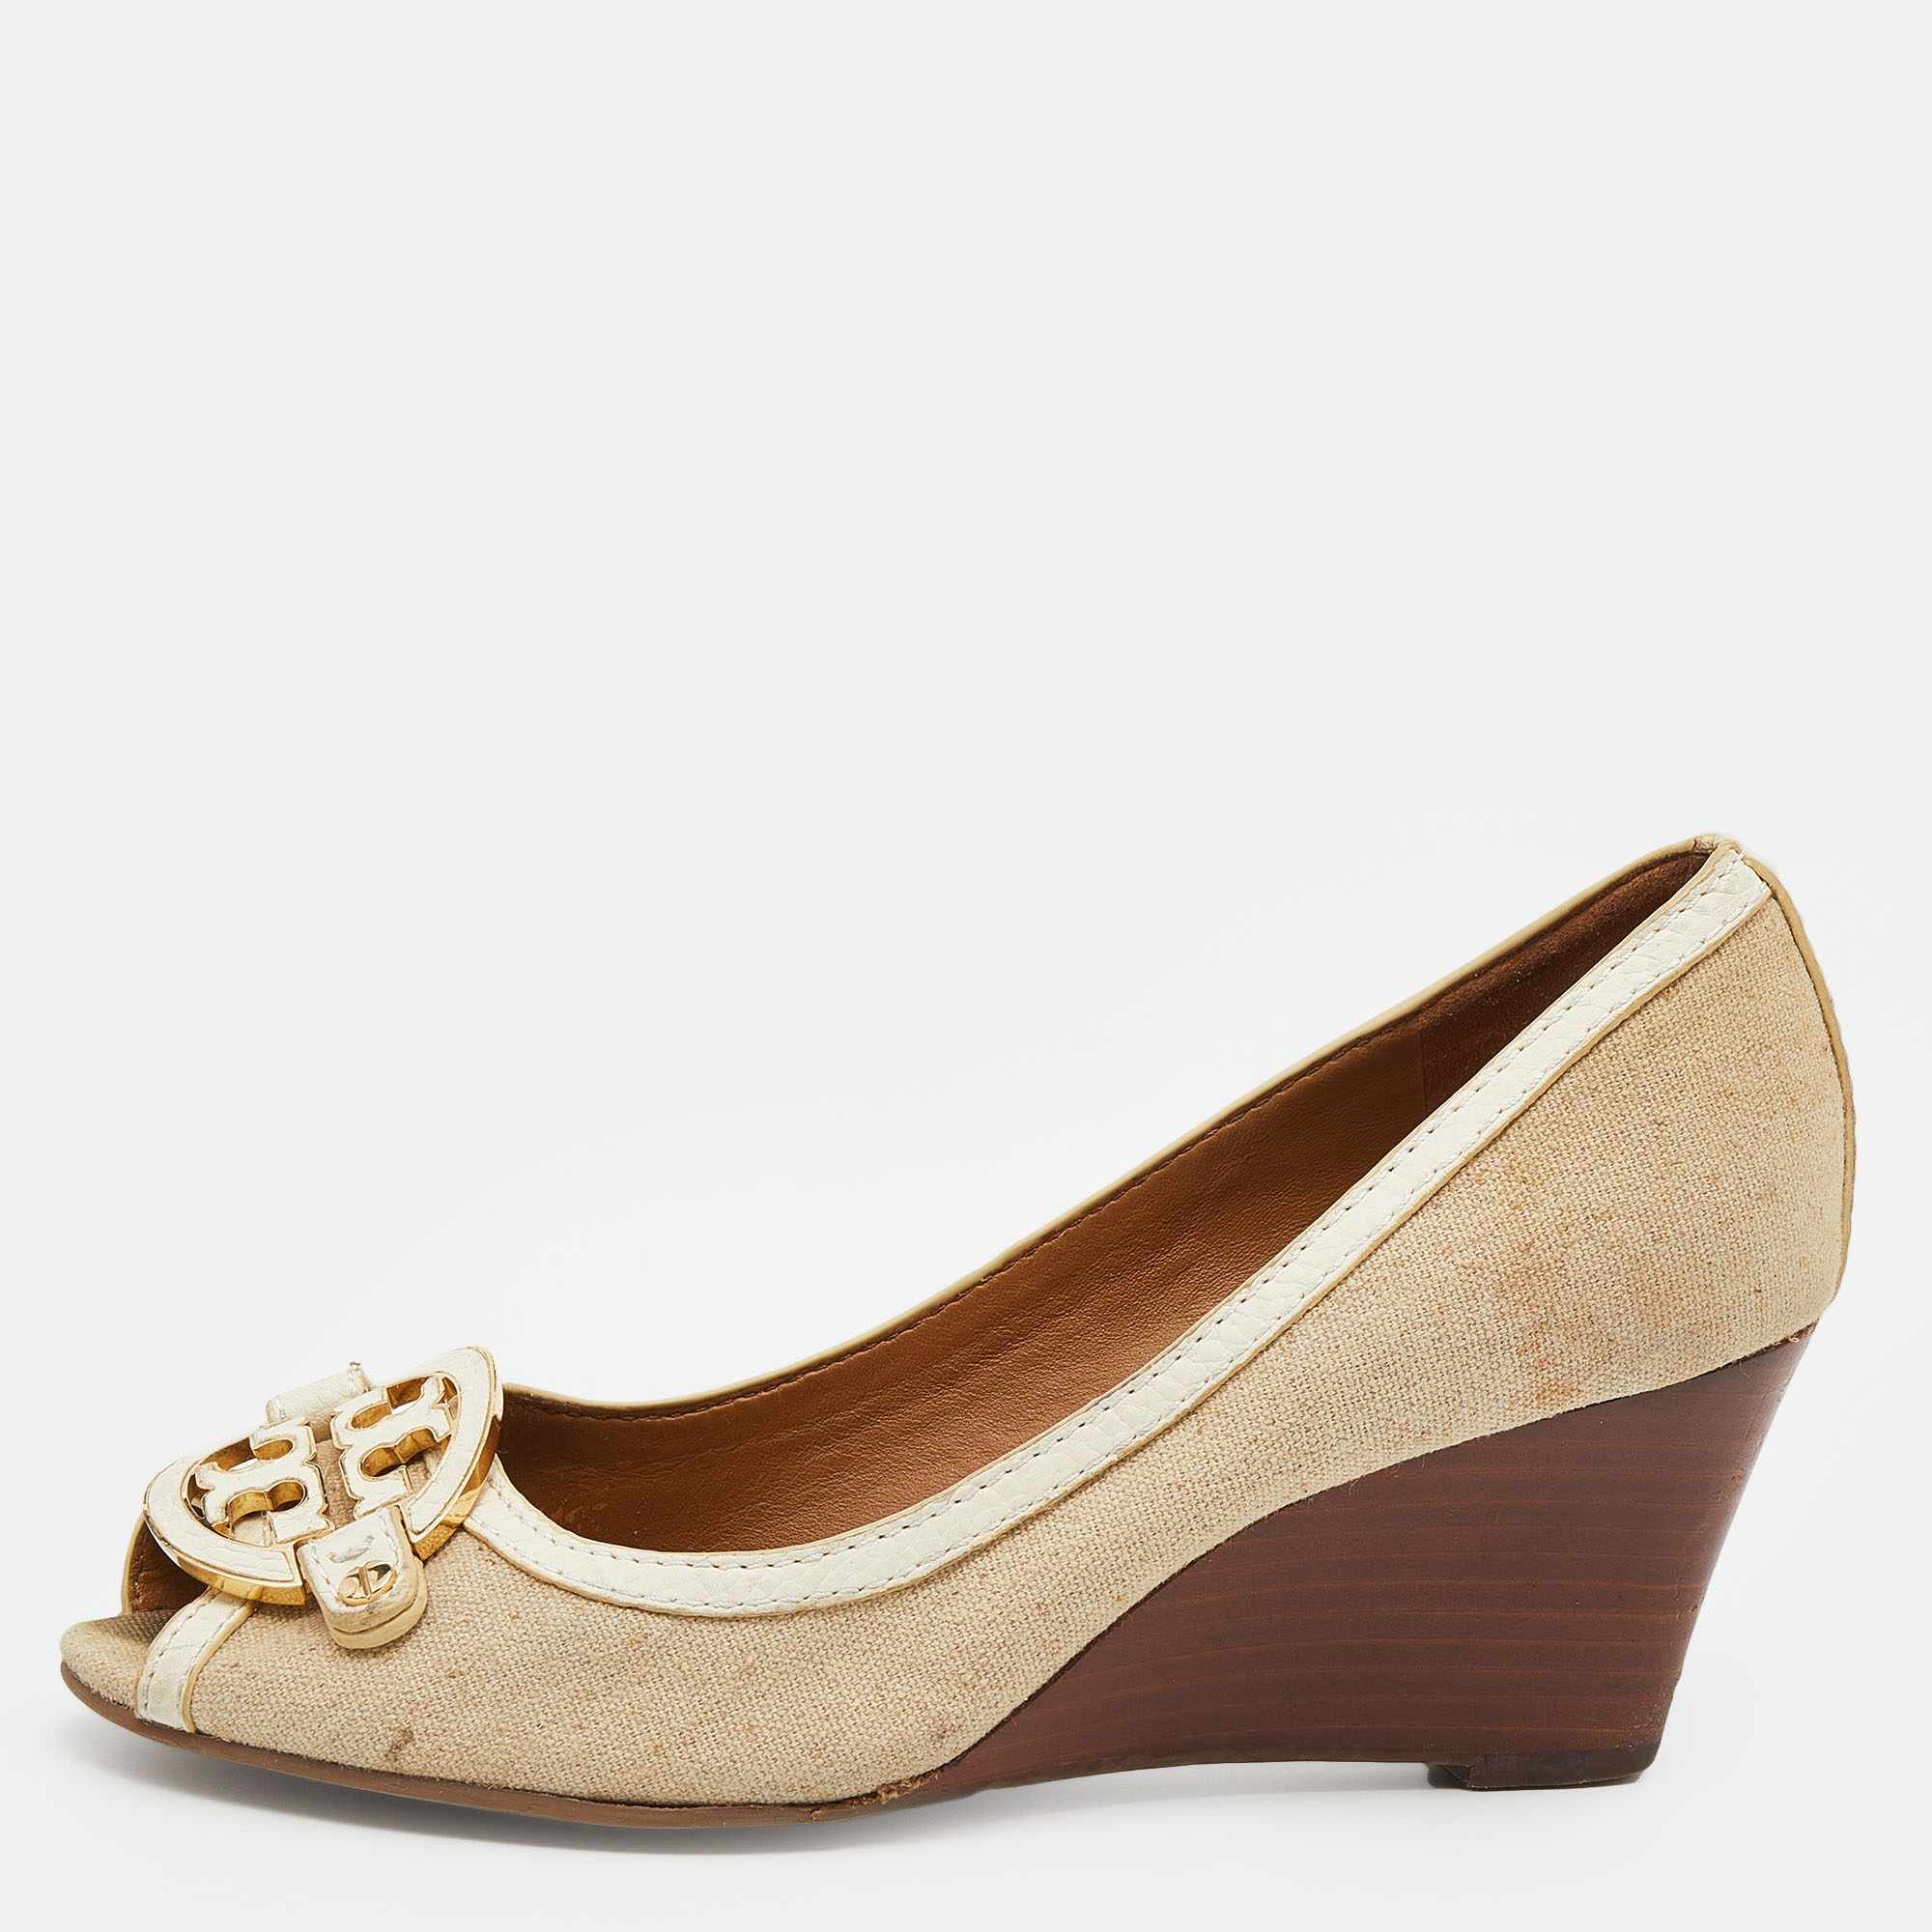 

Tory Burch Beige/White Canvas and Leather Amanda Peep Toe Wedge Pumps Size